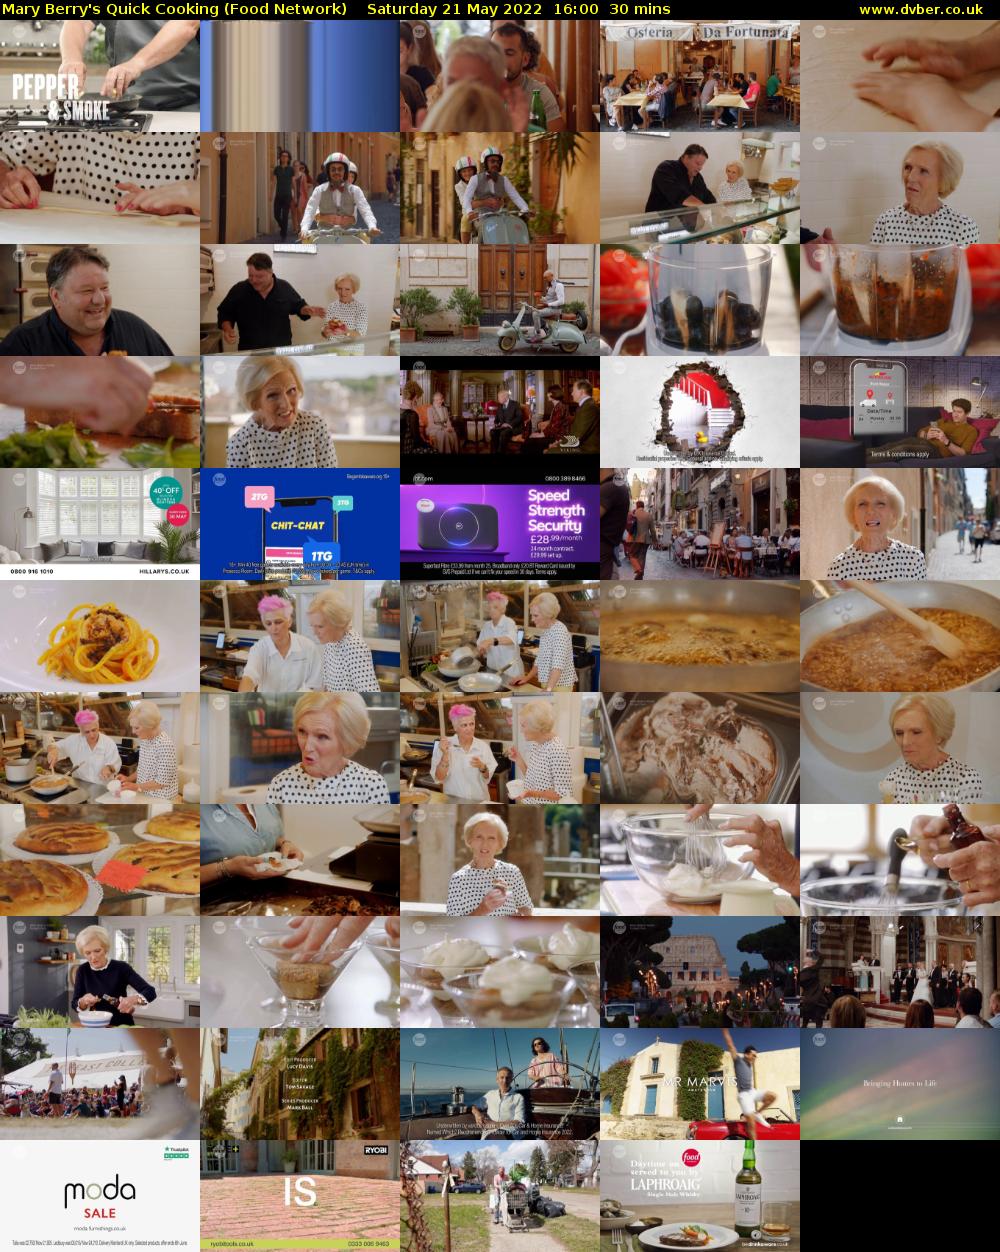 Mary Berry's Quick Cooking (Food Network) Saturday 21 May 2022 16:00 - 16:30